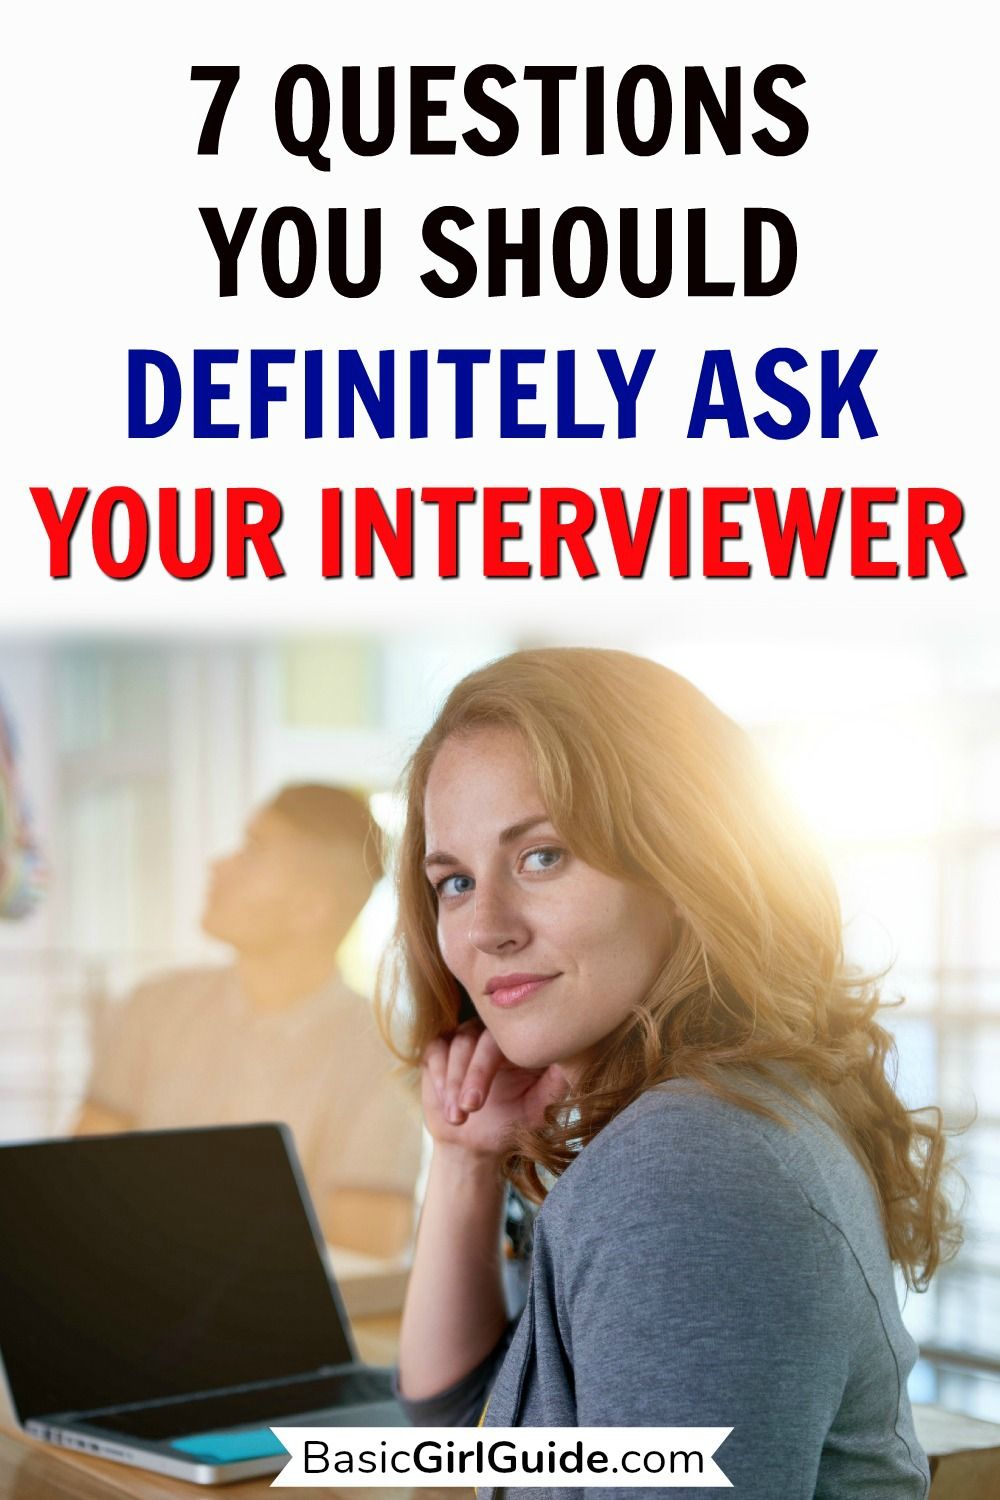 What Should I Ask During An Interview - InterviewProTips.com